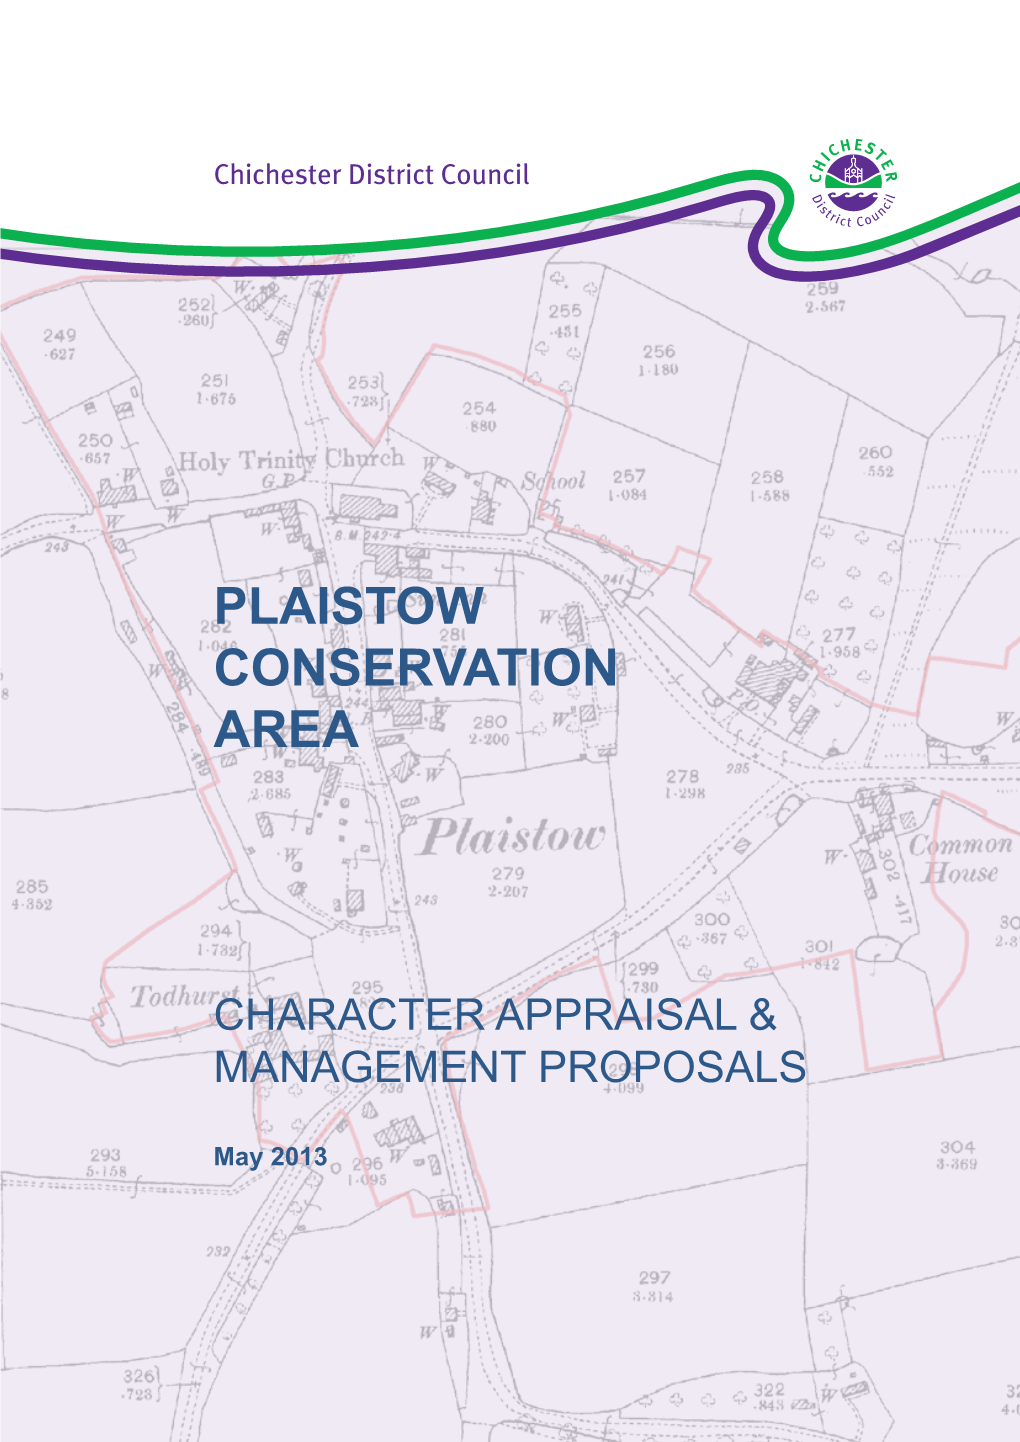 Plaistow Conservation Area Character Appraisal and Management Proposals